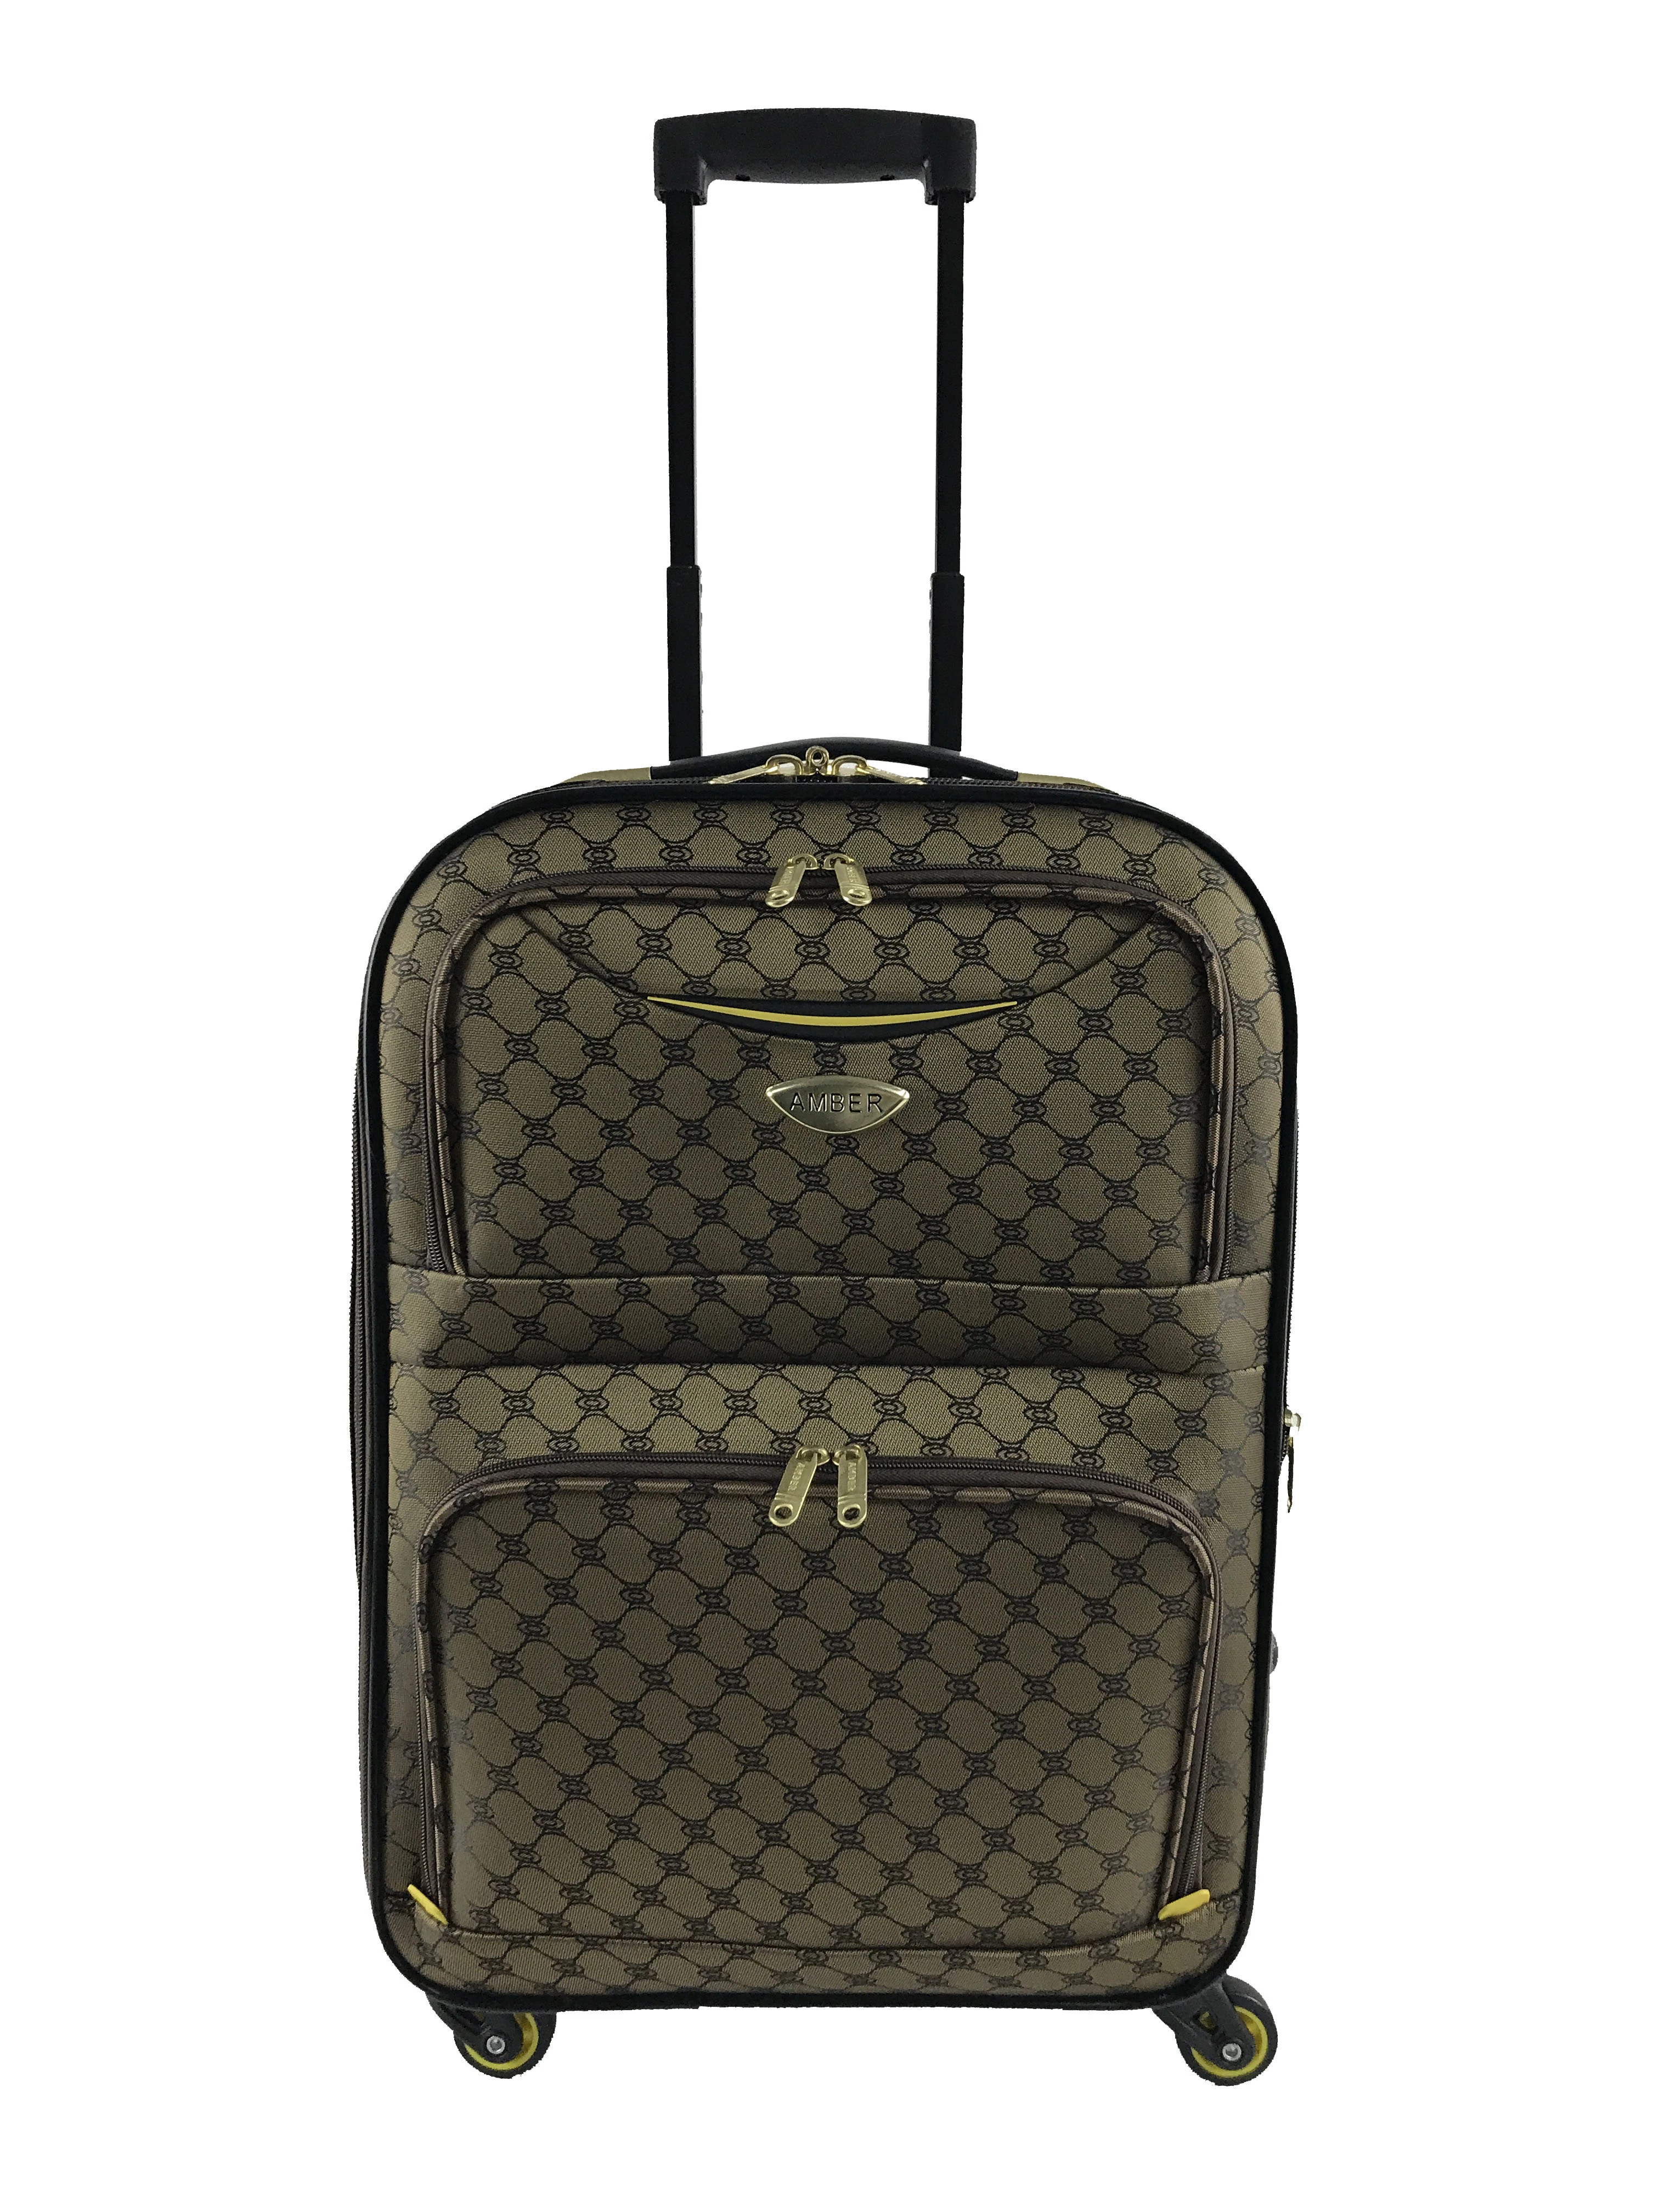 China Manufacturer waterproof oxford fabric luggage bag soft luggage soft trolley luggage